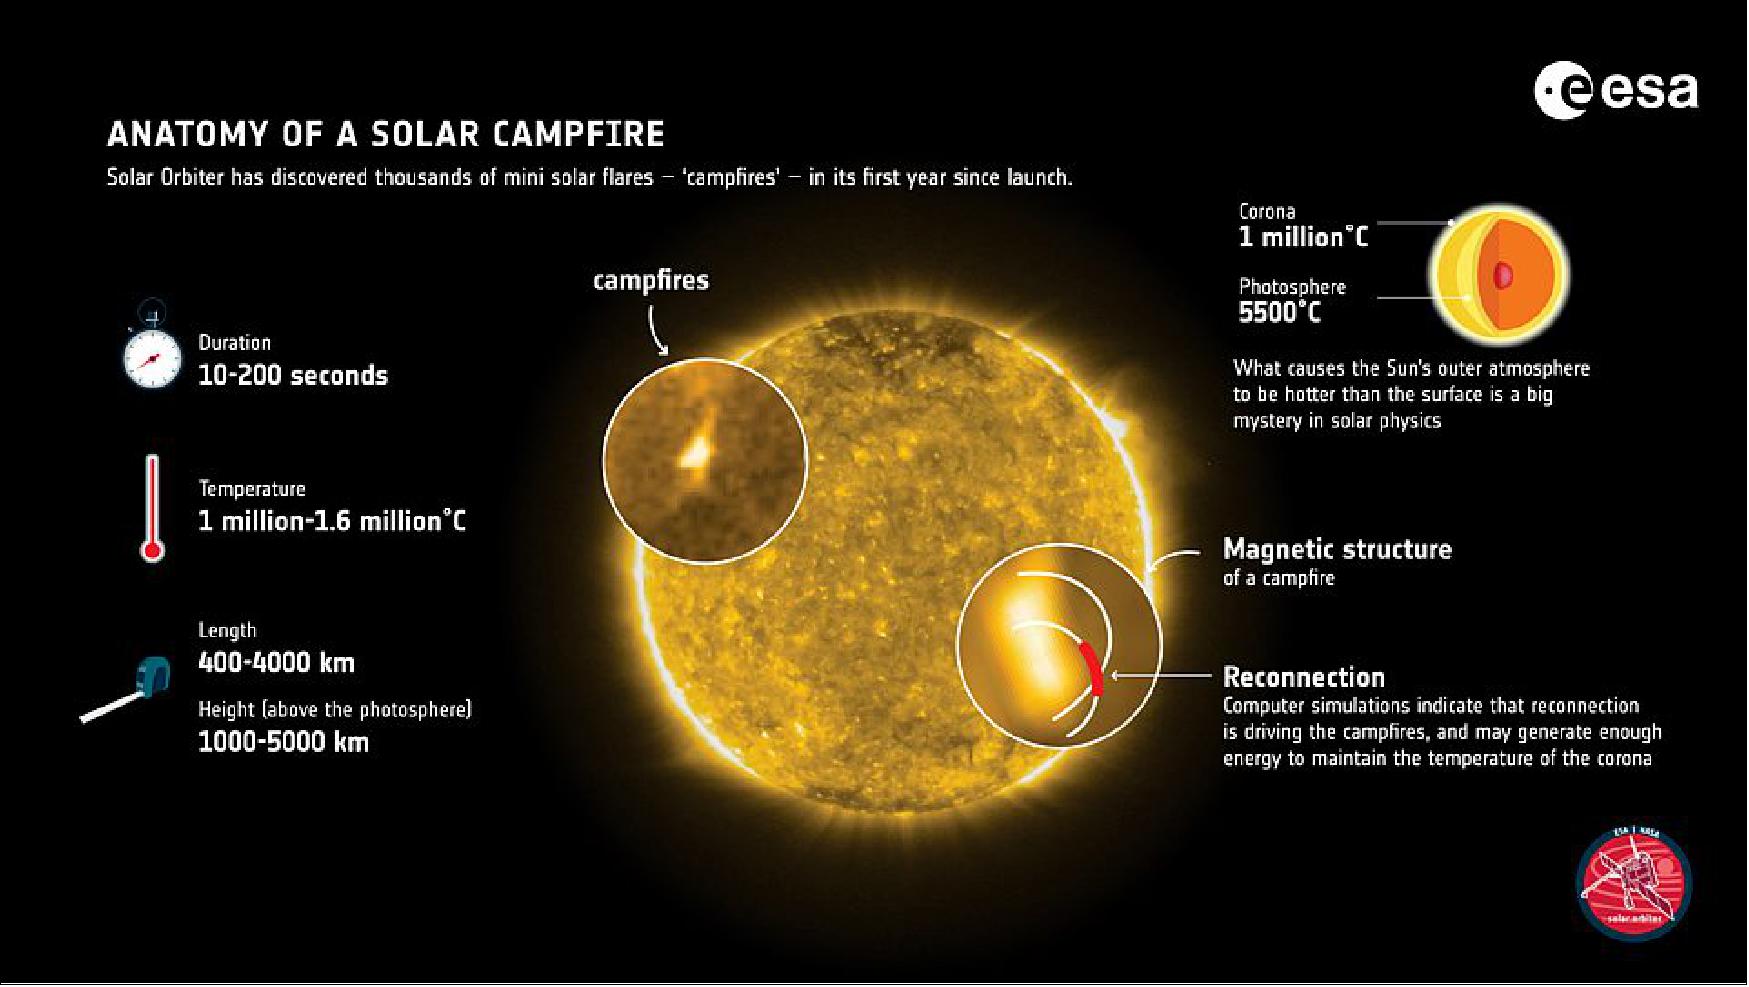 Figure 56: What do we know about solar campfires so far? This graphic provides a summary of what ESA's Solar Orbiter mission, as well as computer modelling, has revealed about solar campfires in the first year of the mission. Campfires are miniature solar flares manifesting as short-lived brightenings in the lower corona, rooted in the magnetic flux concentrations of the chromosphere. They were first identified in Extreme Ultraviolet Imager data, and computer simulations are providing insights into the magnetic field phenomena driving them [image credit: Sun image: Solar Orbiter/EUI Team/ESA & NASA; Data: Berghmans et al (2021) and Chen et al (2021)]